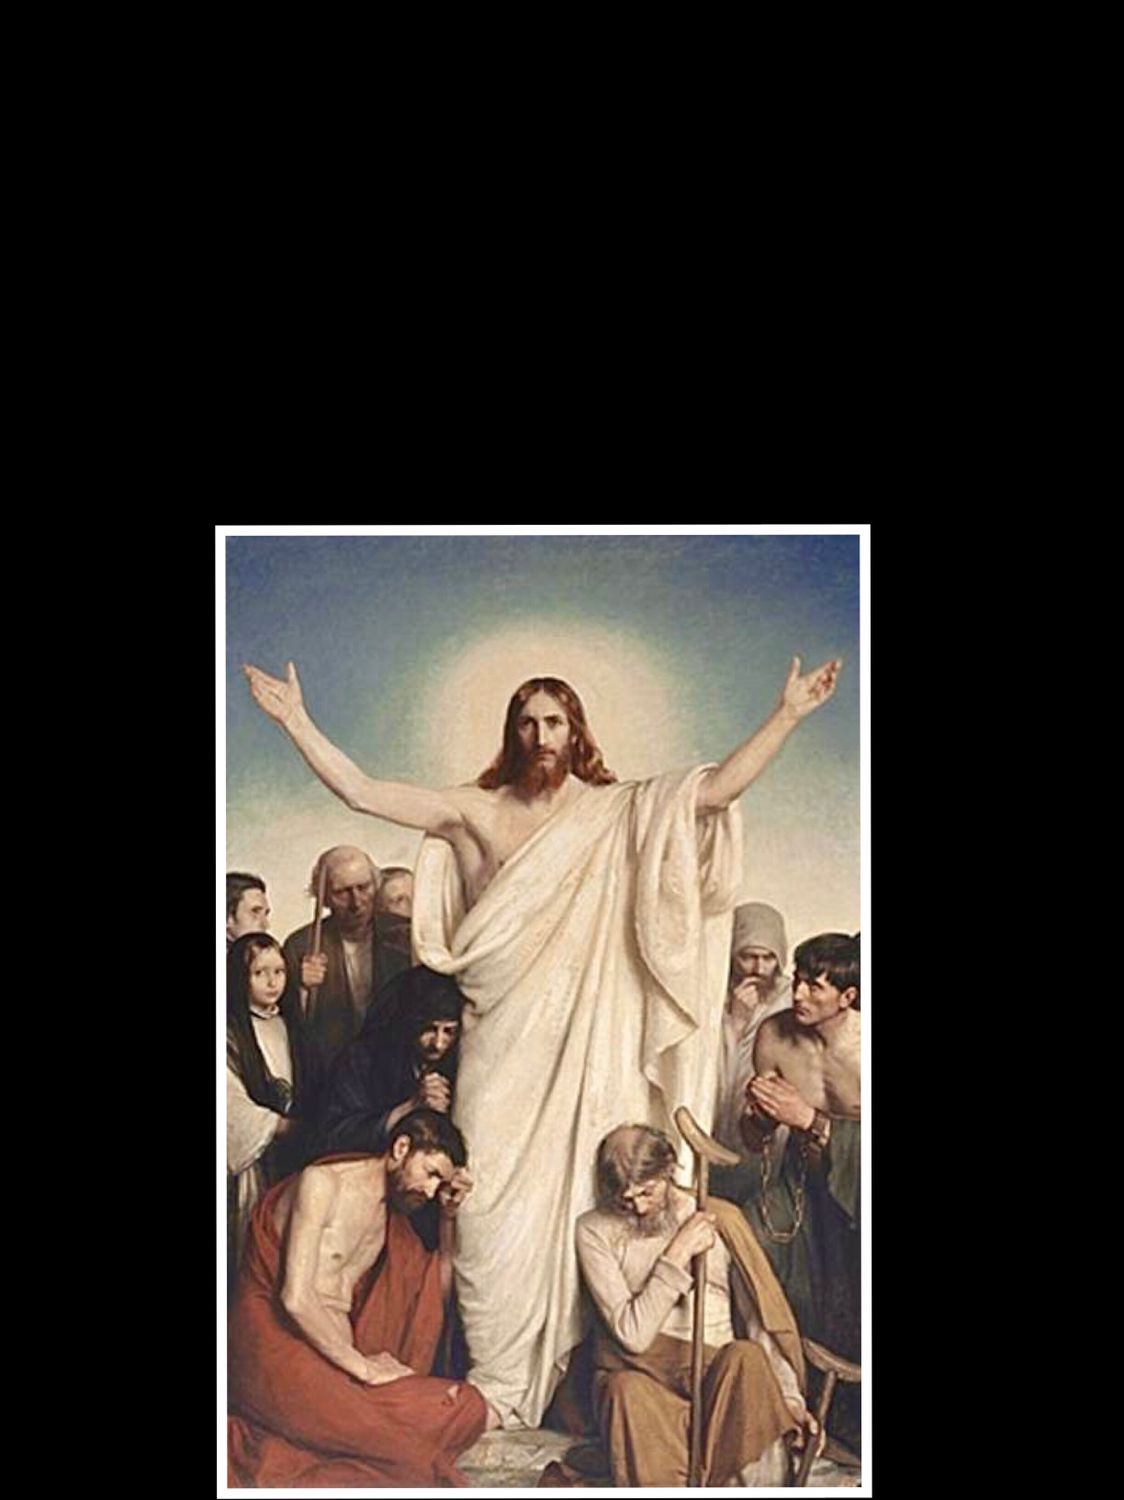 1124x1500 Found A Picture And Made A Wallpaper For A Post That Didnt Find It Over 6 Months Ago So It Looks Like Jesus Is Holding You Notification Messages Imgur